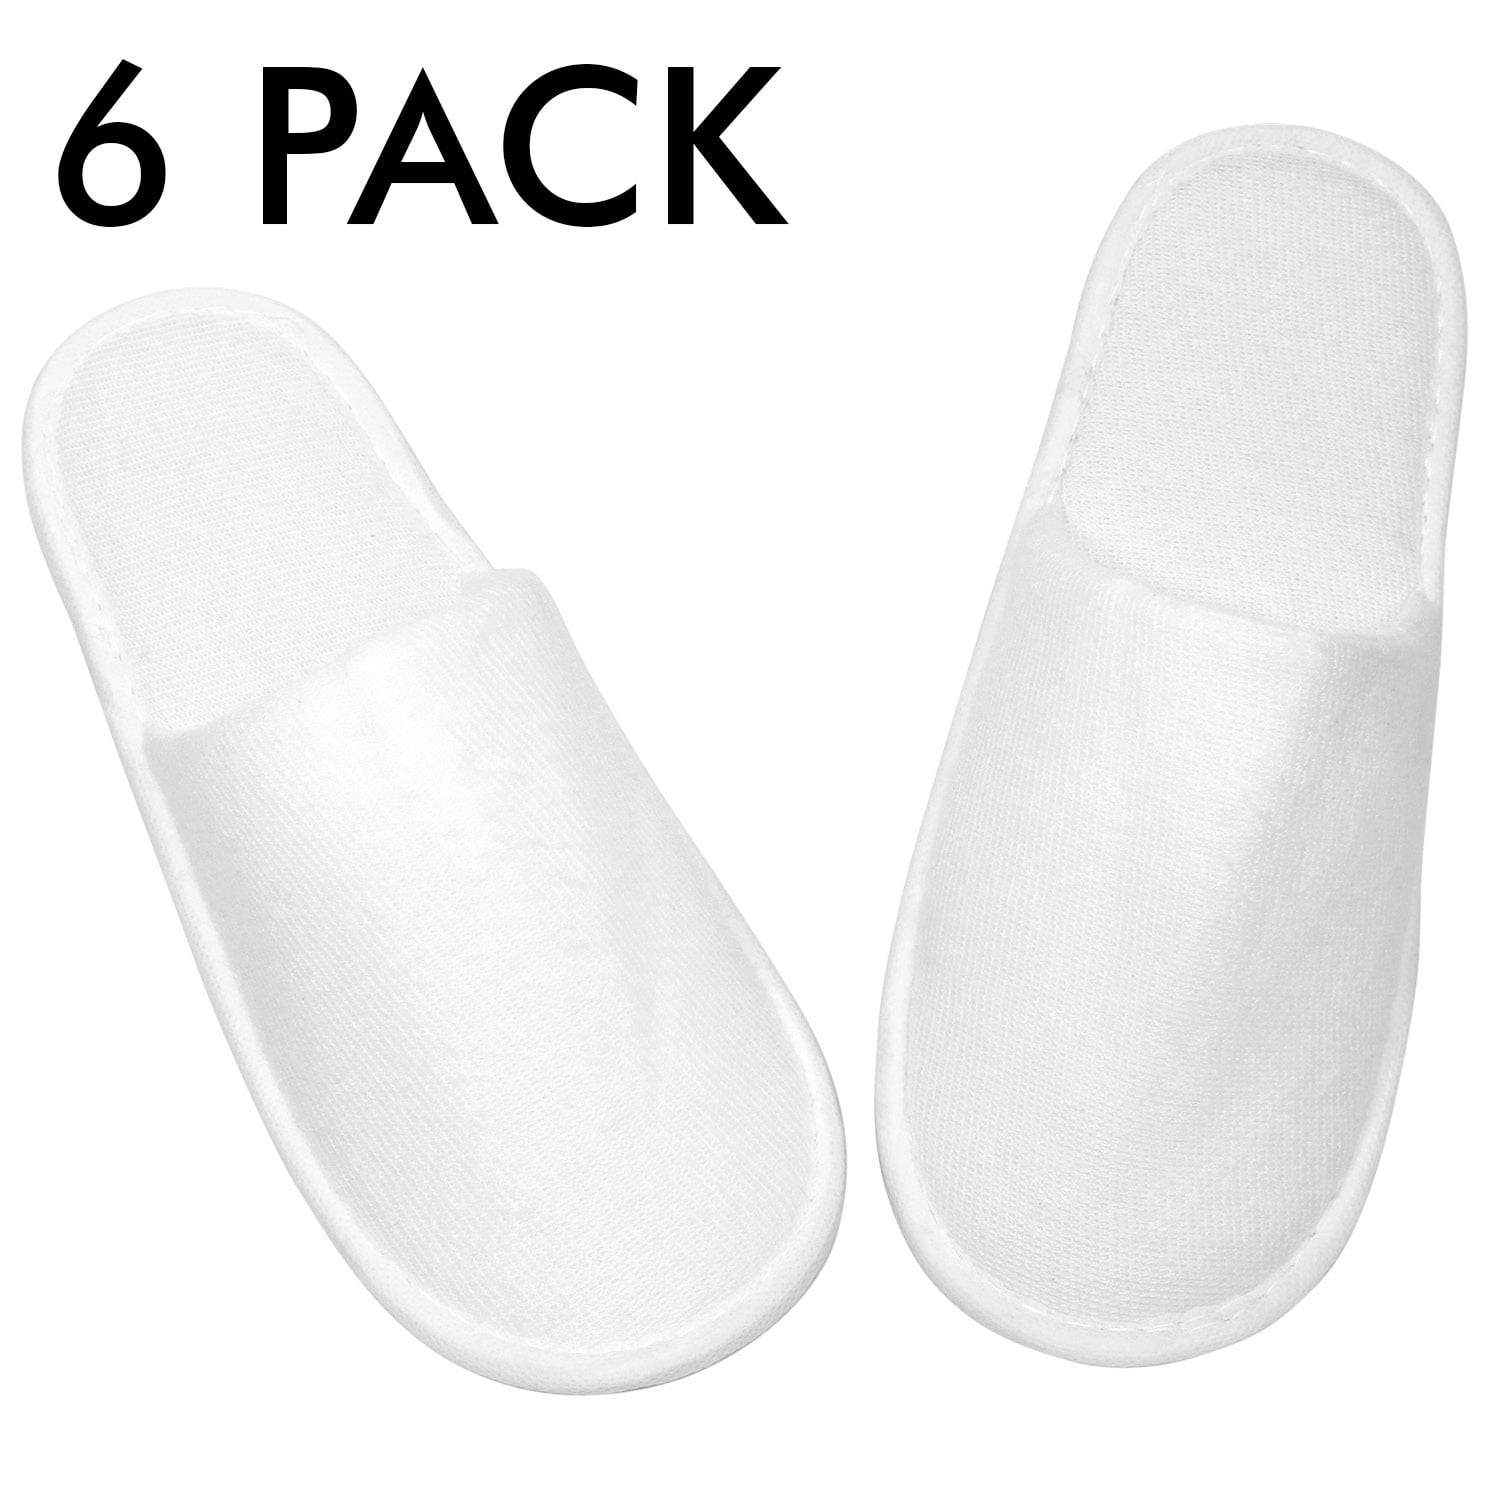 Pair men's or women's Slippers Washable Disposable Portable Reusable for Home Bathroom SPA Family Guests Travel Hotel Sauna Pool Garden Backyard Hospital Real Estate Soft Cozy Comfortable Breathable. 